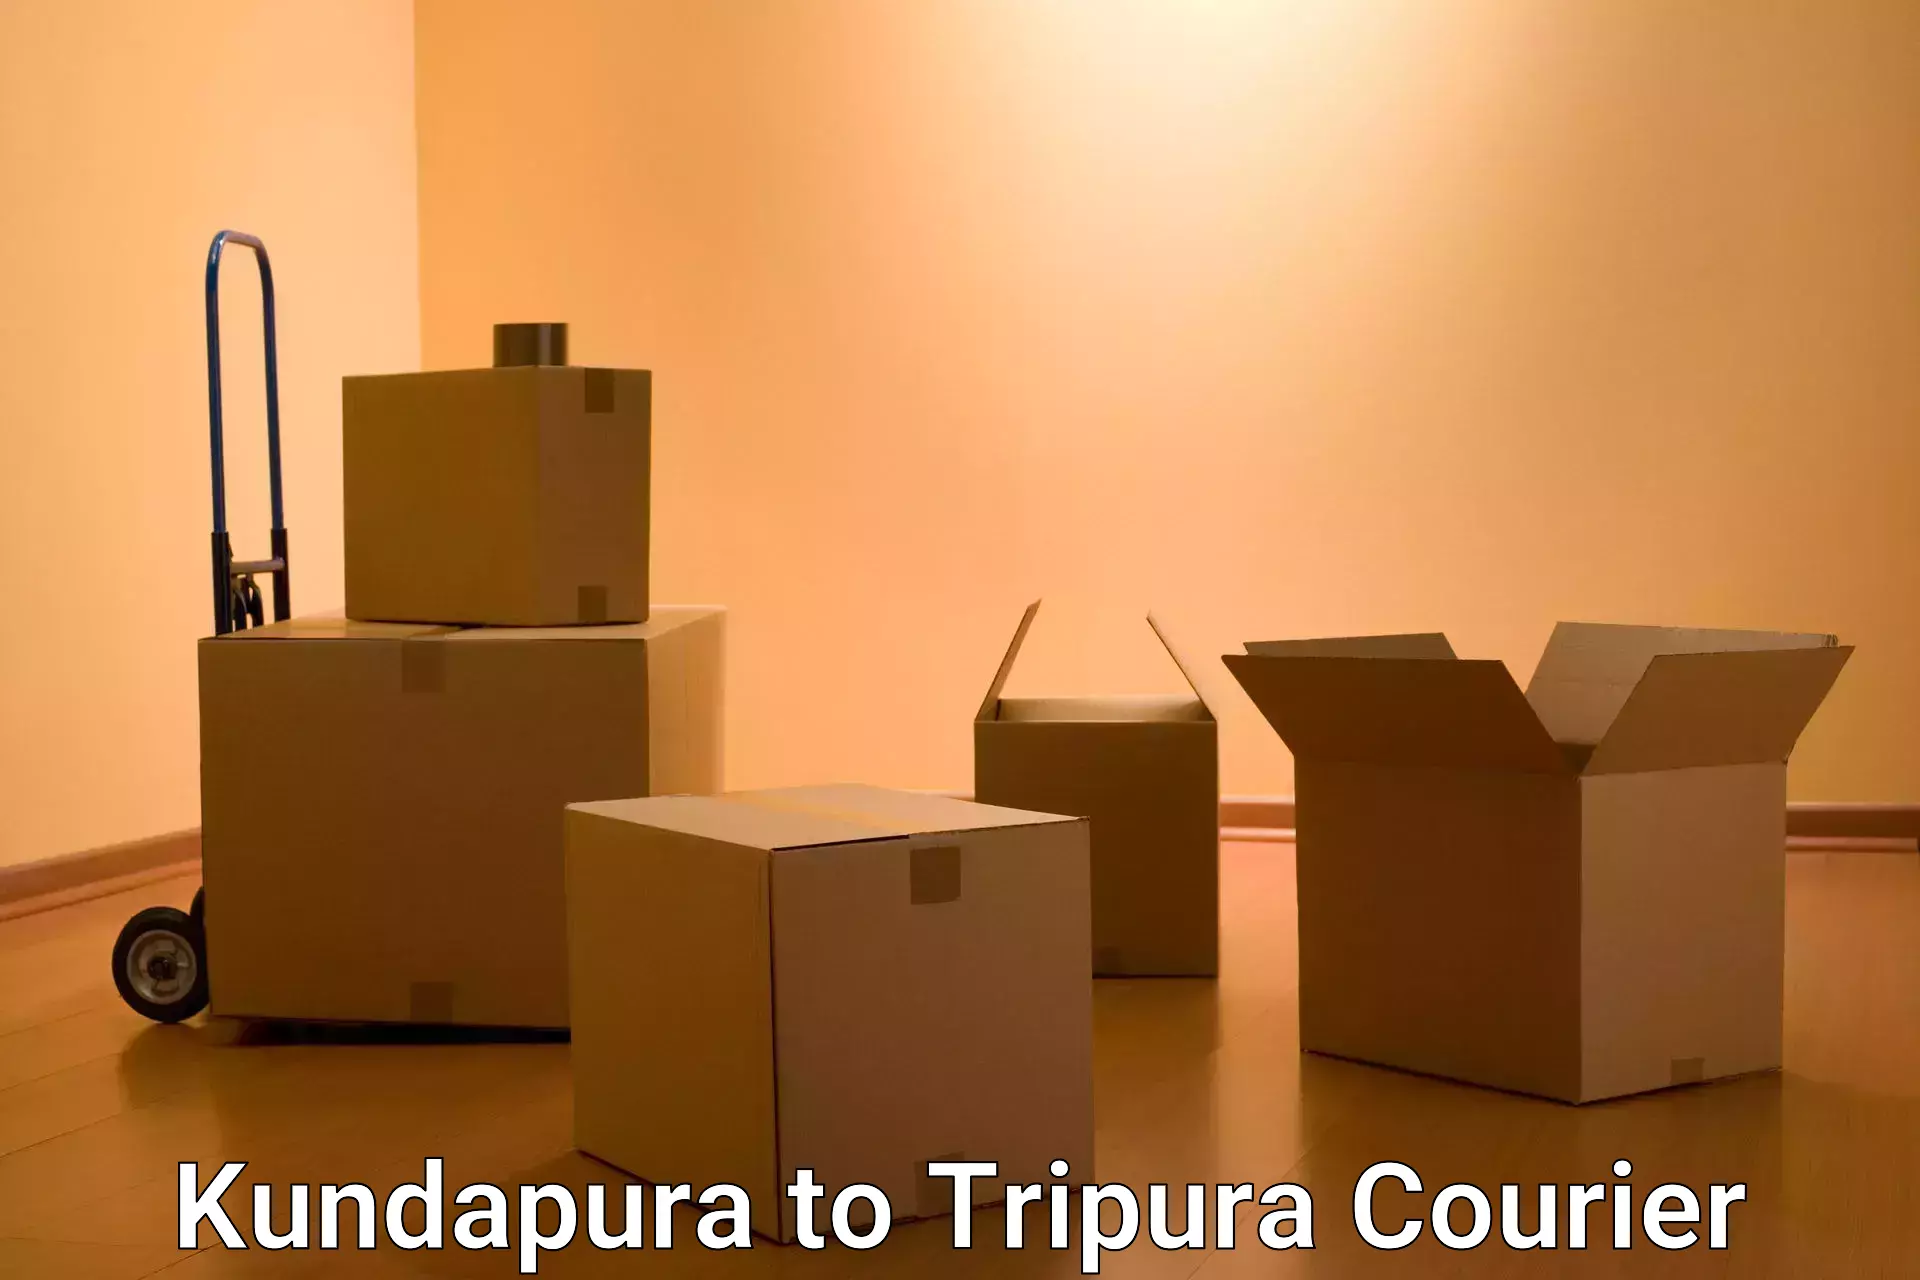 Flexible delivery scheduling Kundapura to Udaipur Tripura